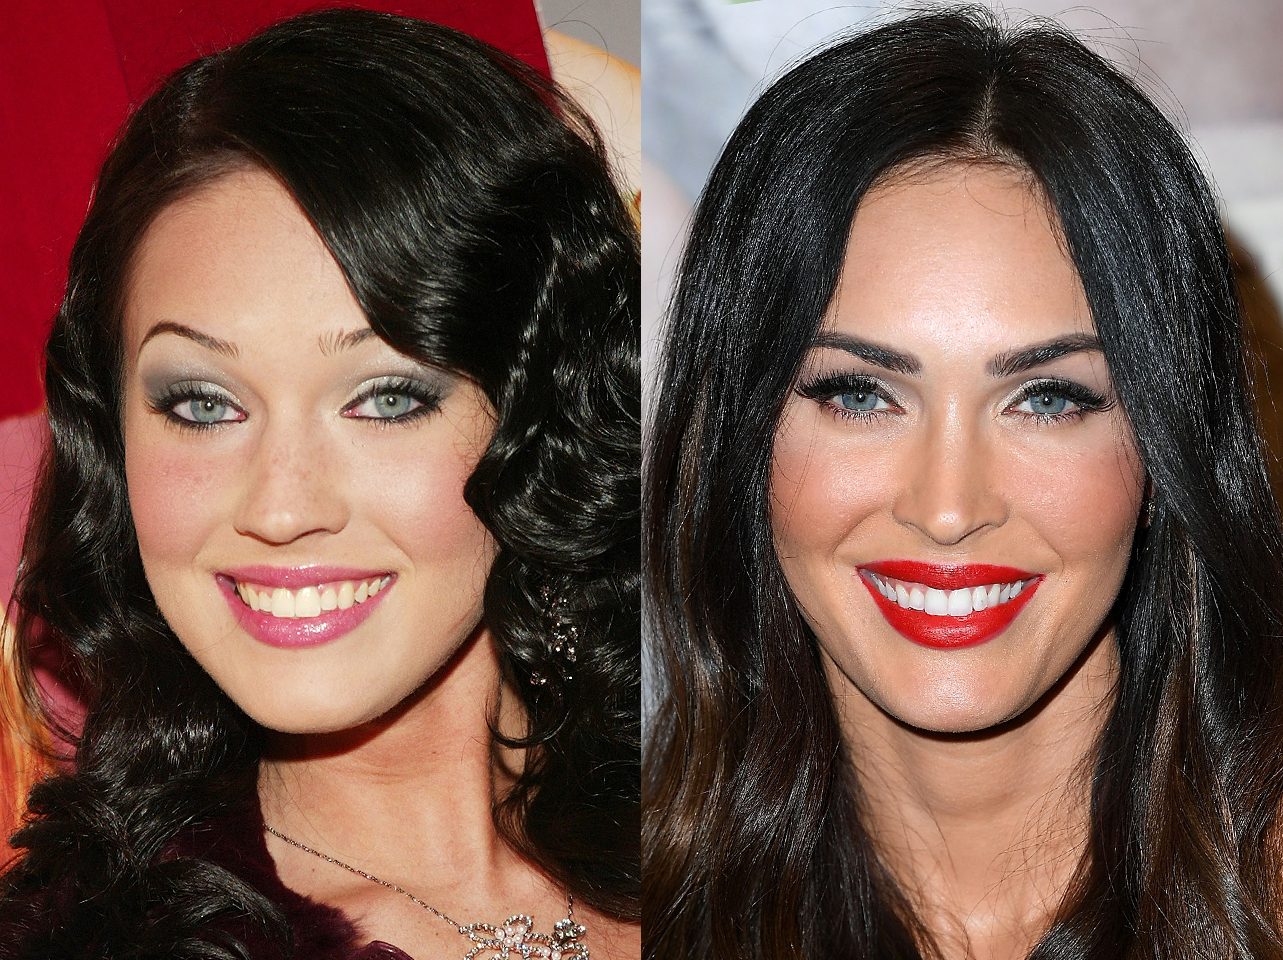 A before and after of Megan Fox's smile. | Source: Getty Images